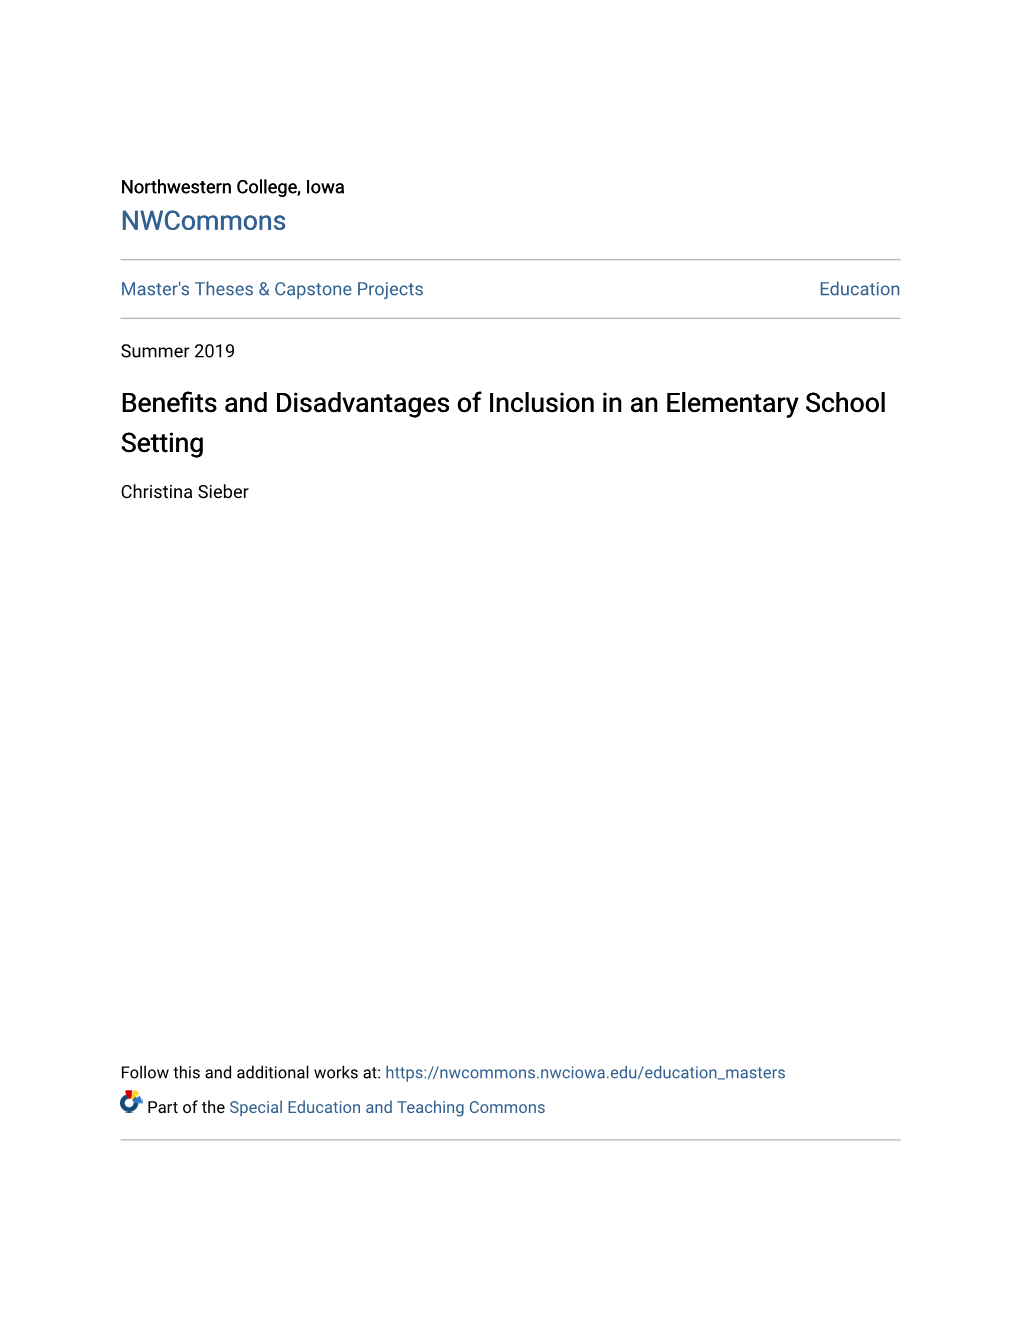 Benefits and Disadvantages of Inclusion in an Elementary School Setting